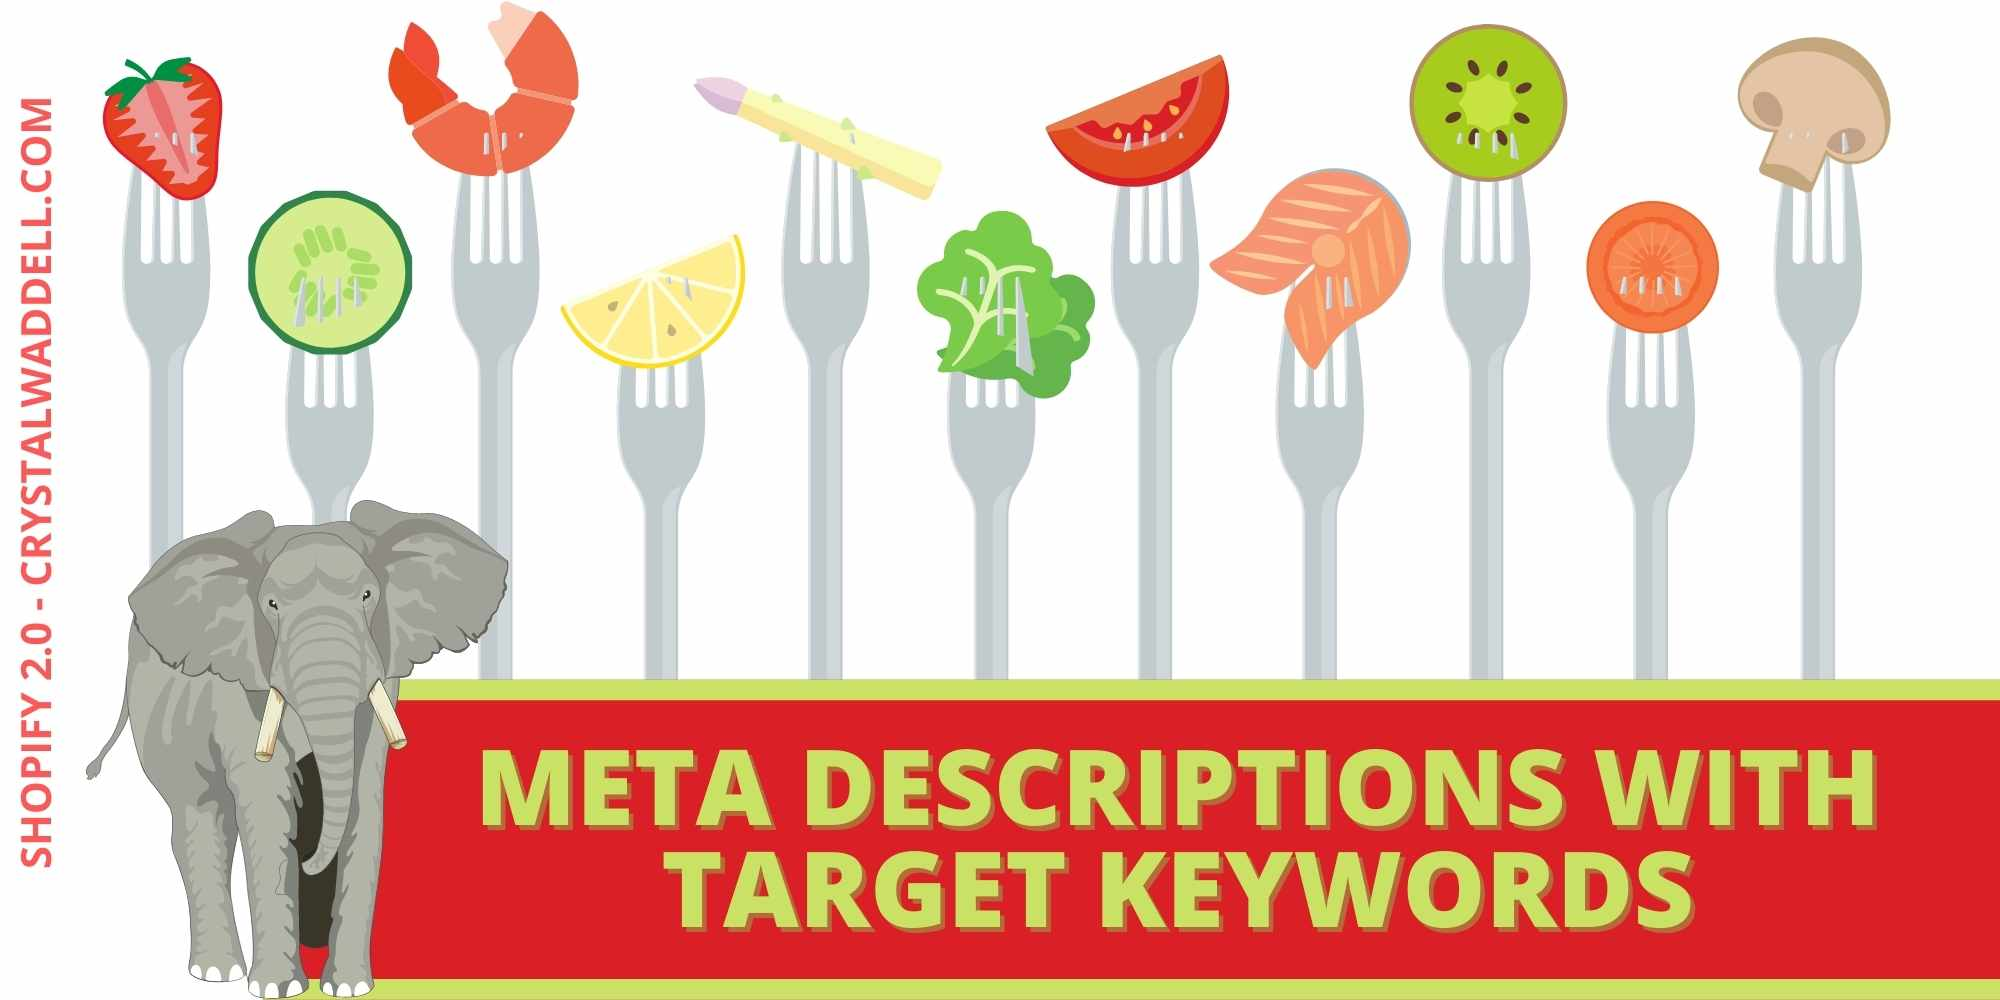 Your meta descriptions on each page you create should include your target keywords and avoid duplicate content. All text should be unique to its individual page.